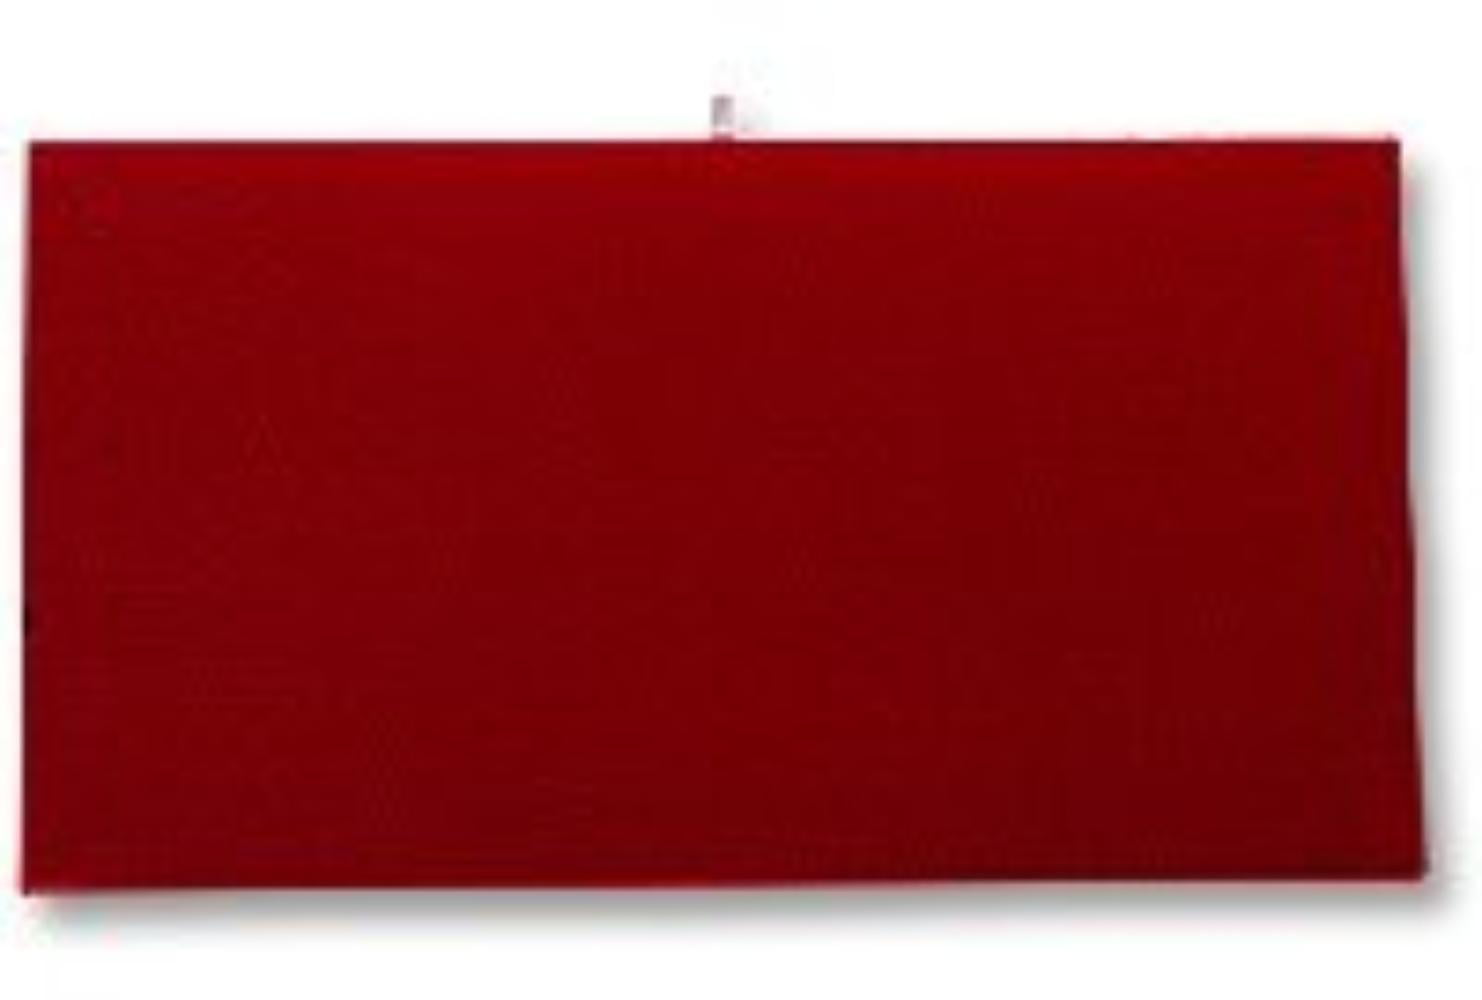 2 Red Velvet Flat Display Pads for Jewelry Hobby Sales Display 14 1/8" x 7 5/8" 